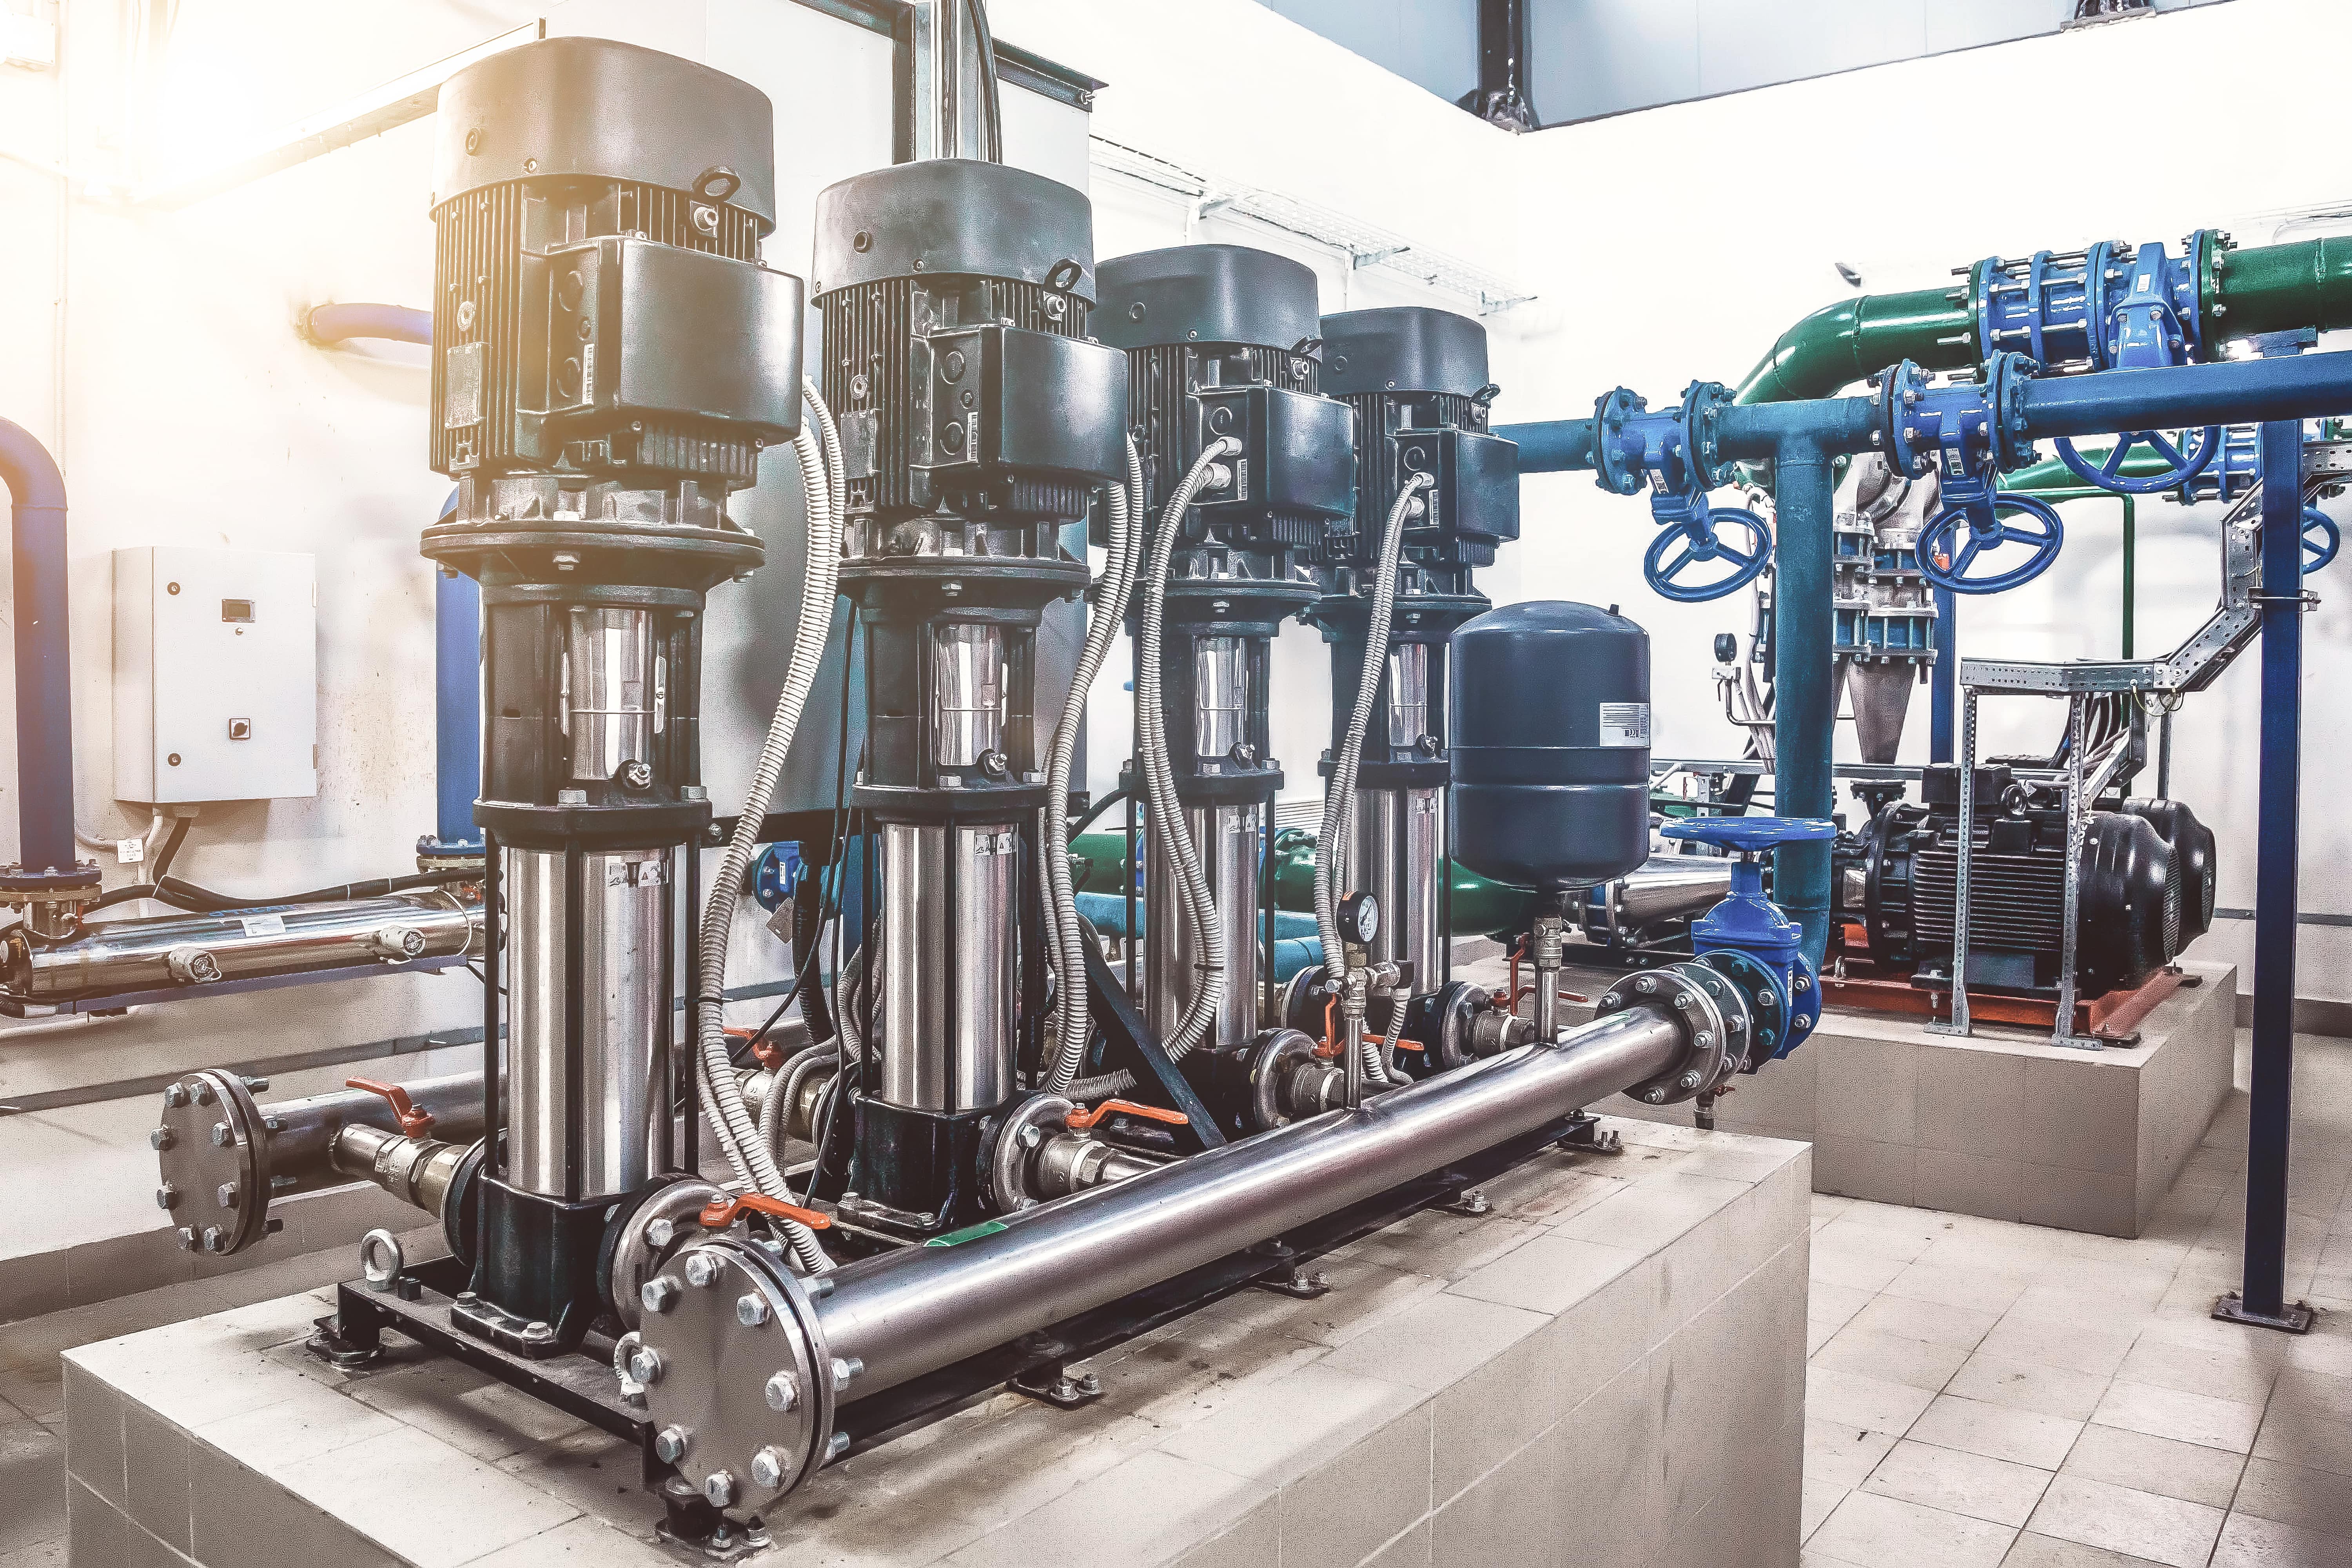 Reducing Energy Consumption and Lowering Carbon Footprint in Pump Stations